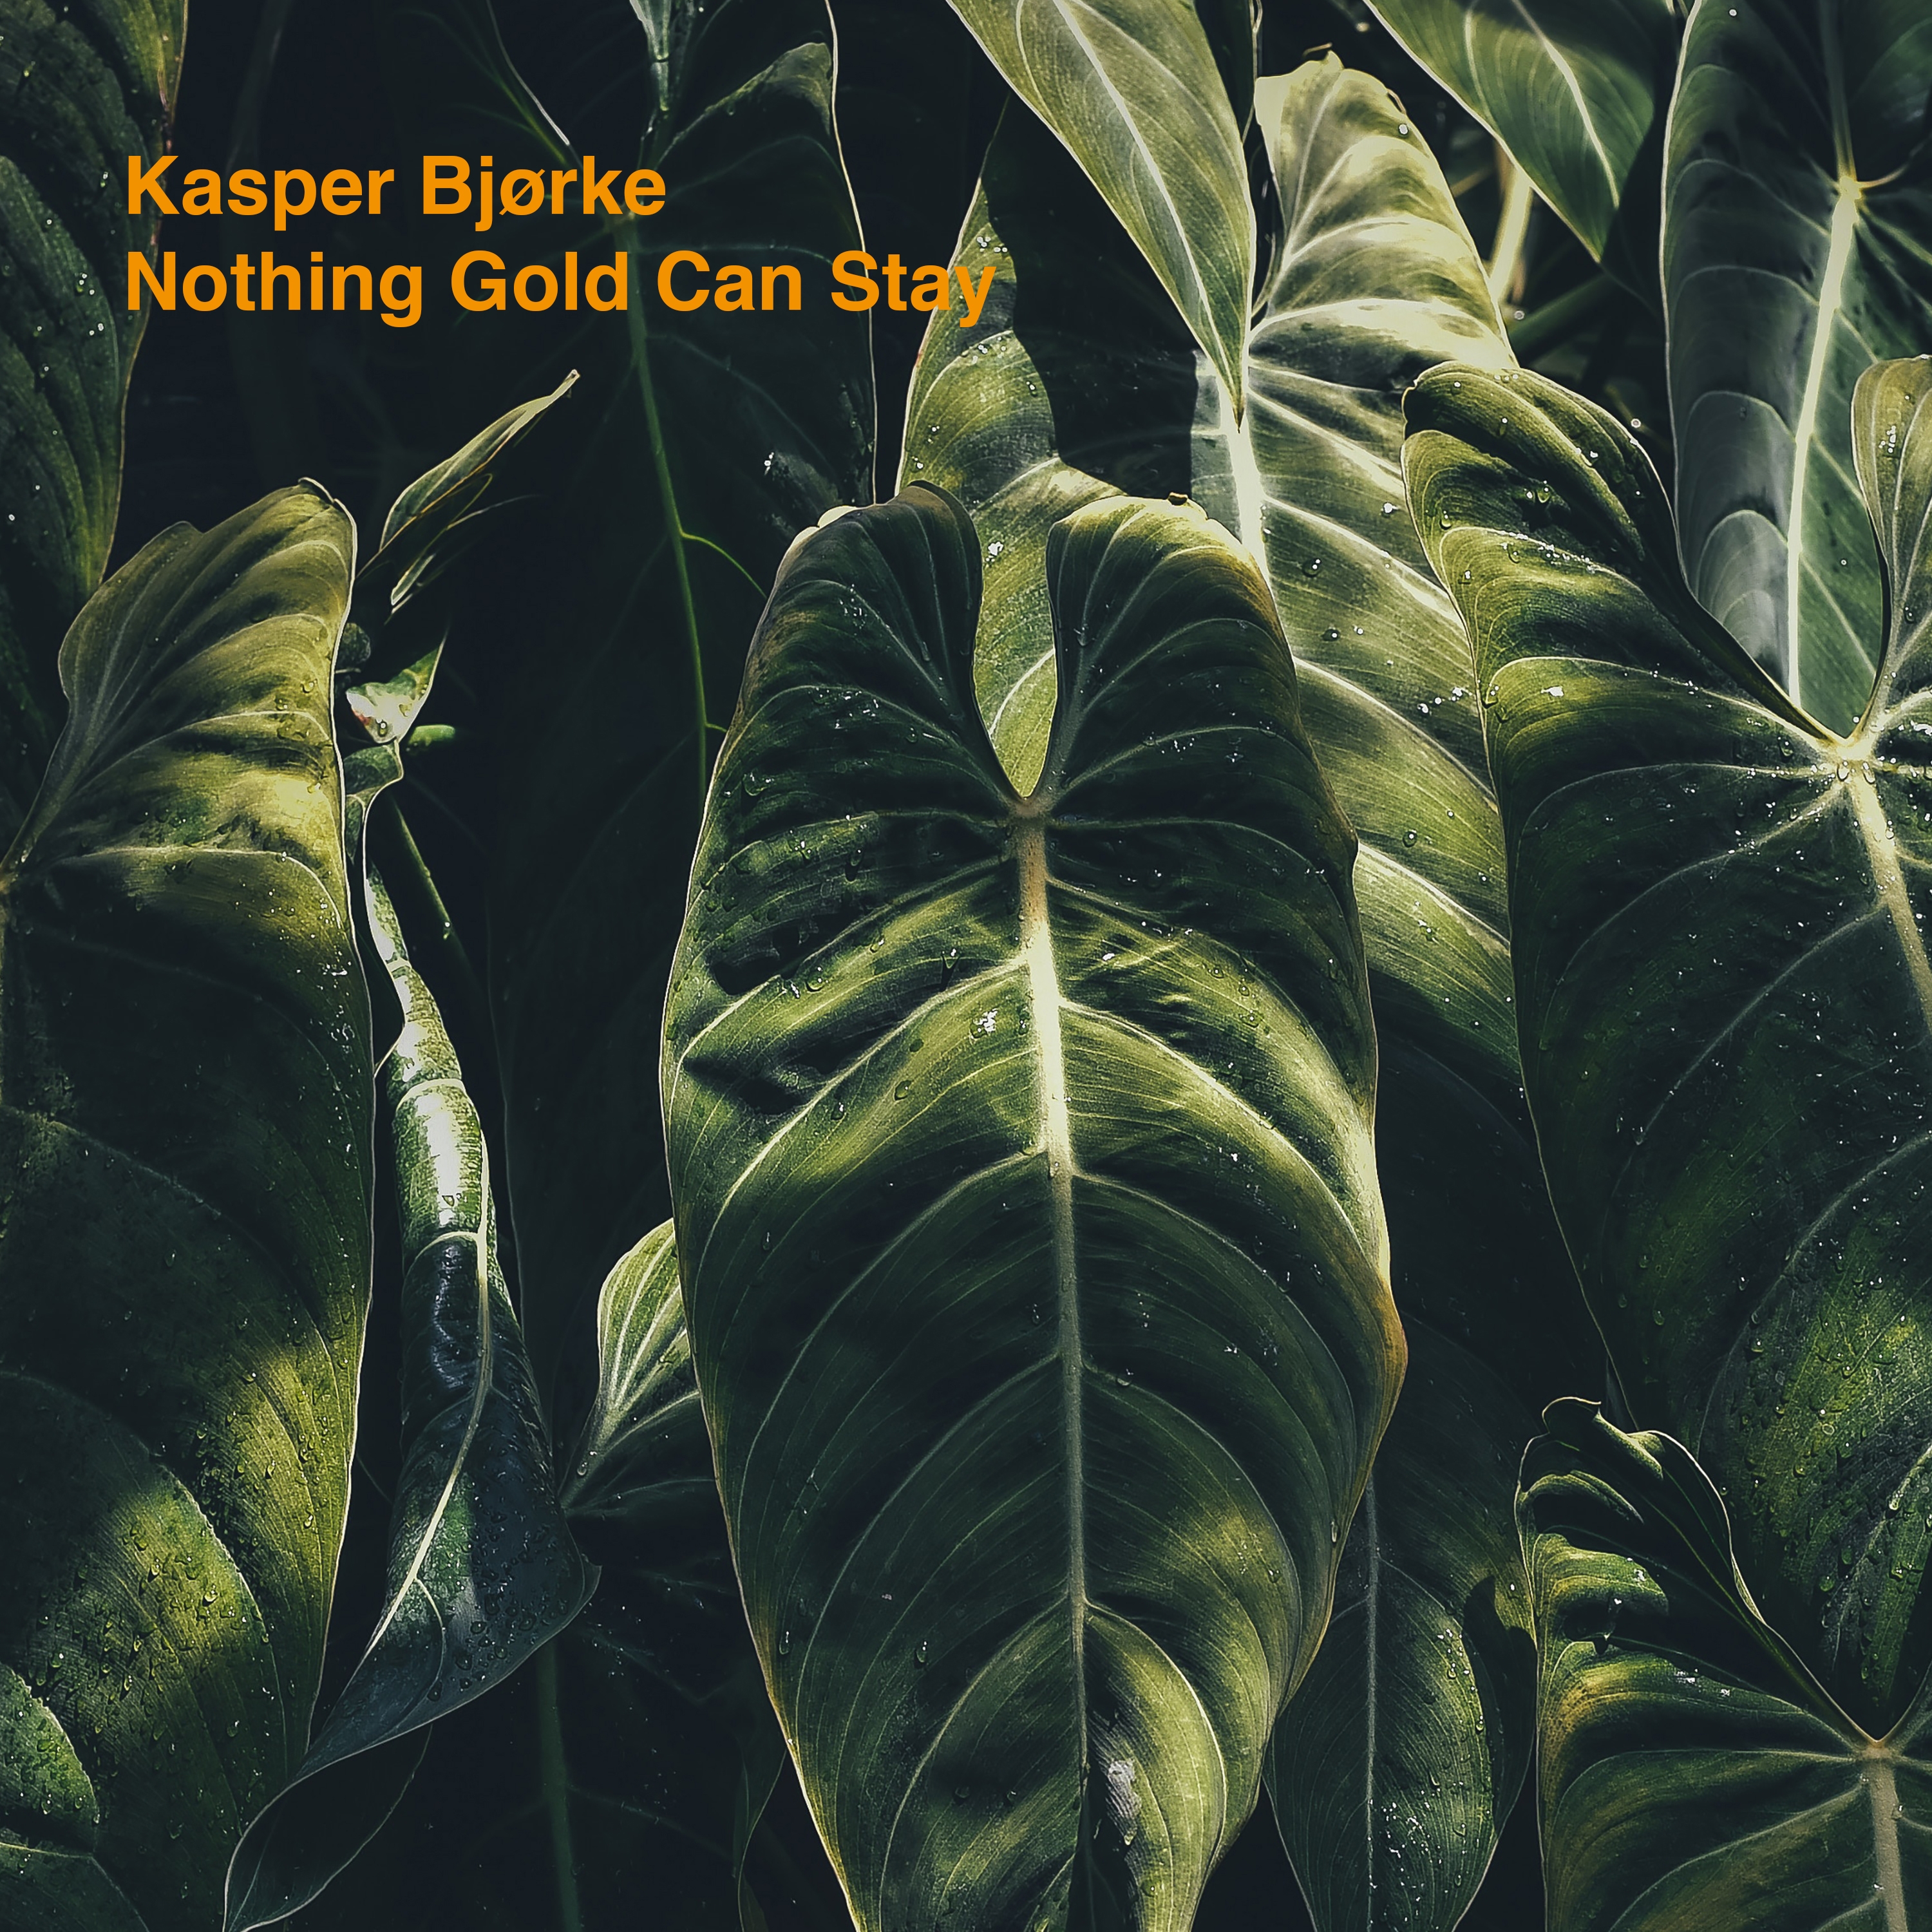 Nothing Gold Can Stay (Collected) - Kasper Bjørke